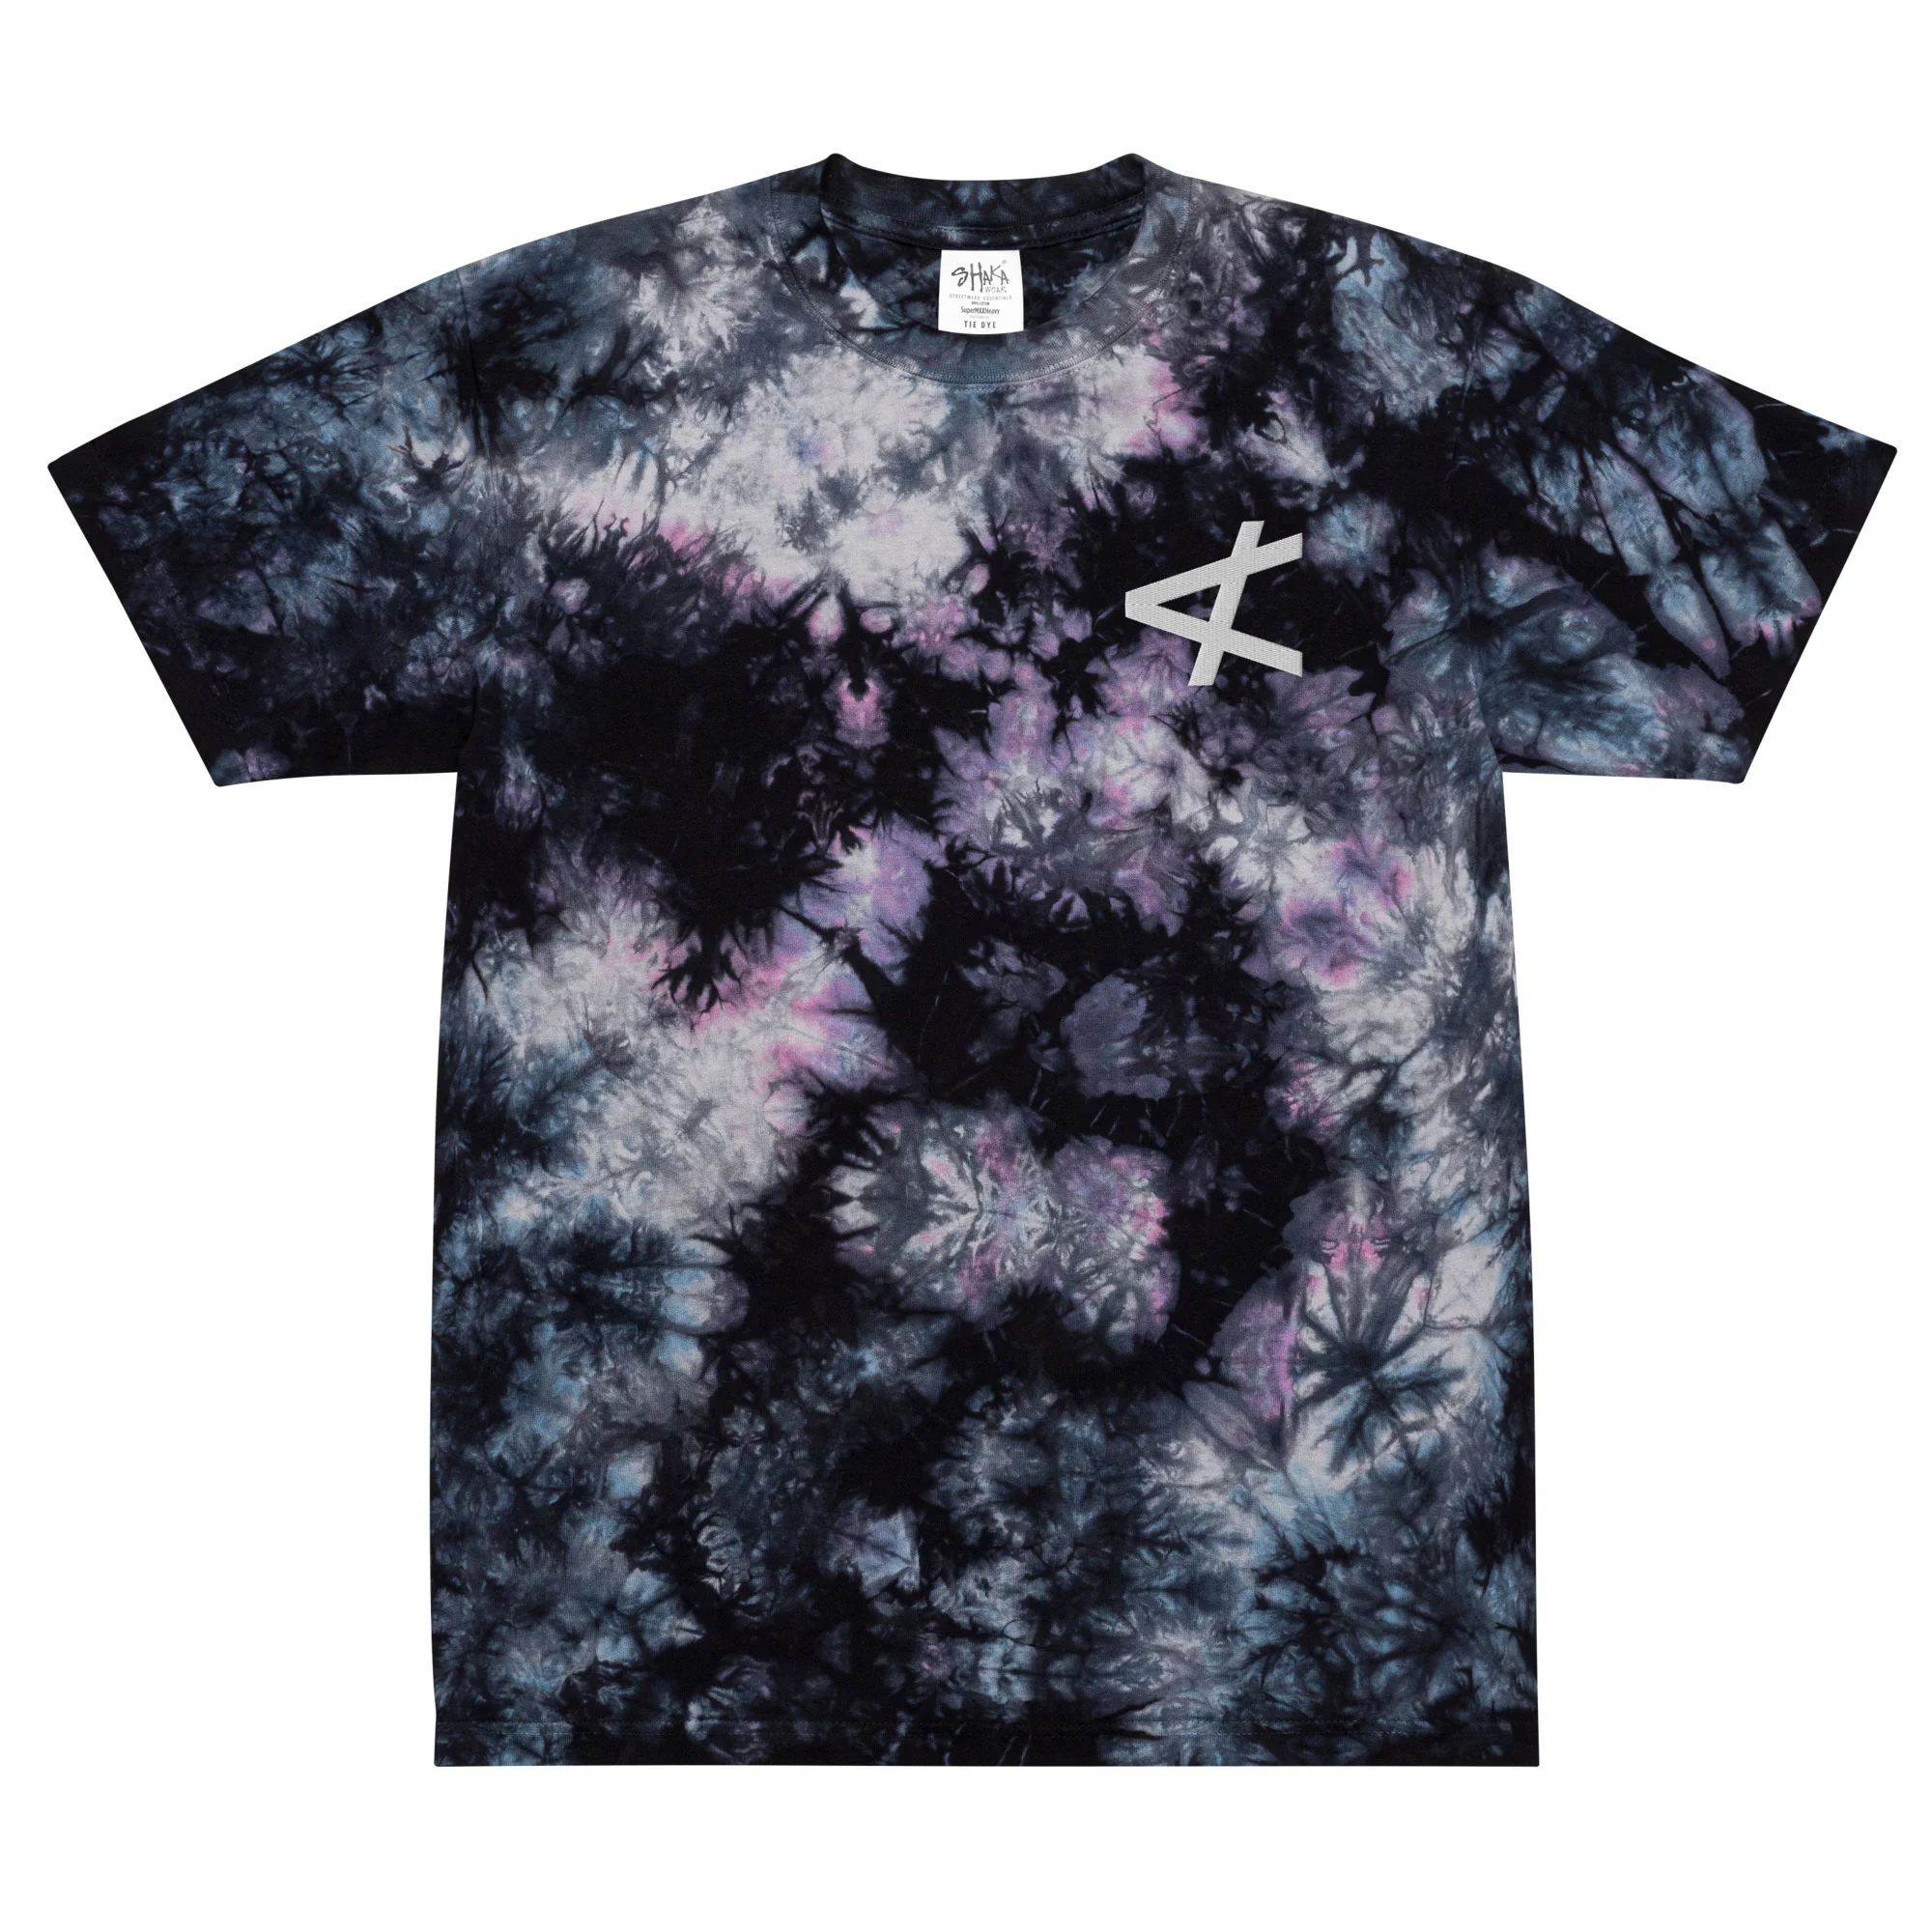 Product image for Not Less Than – Women’s Oversized Tie-Dye T